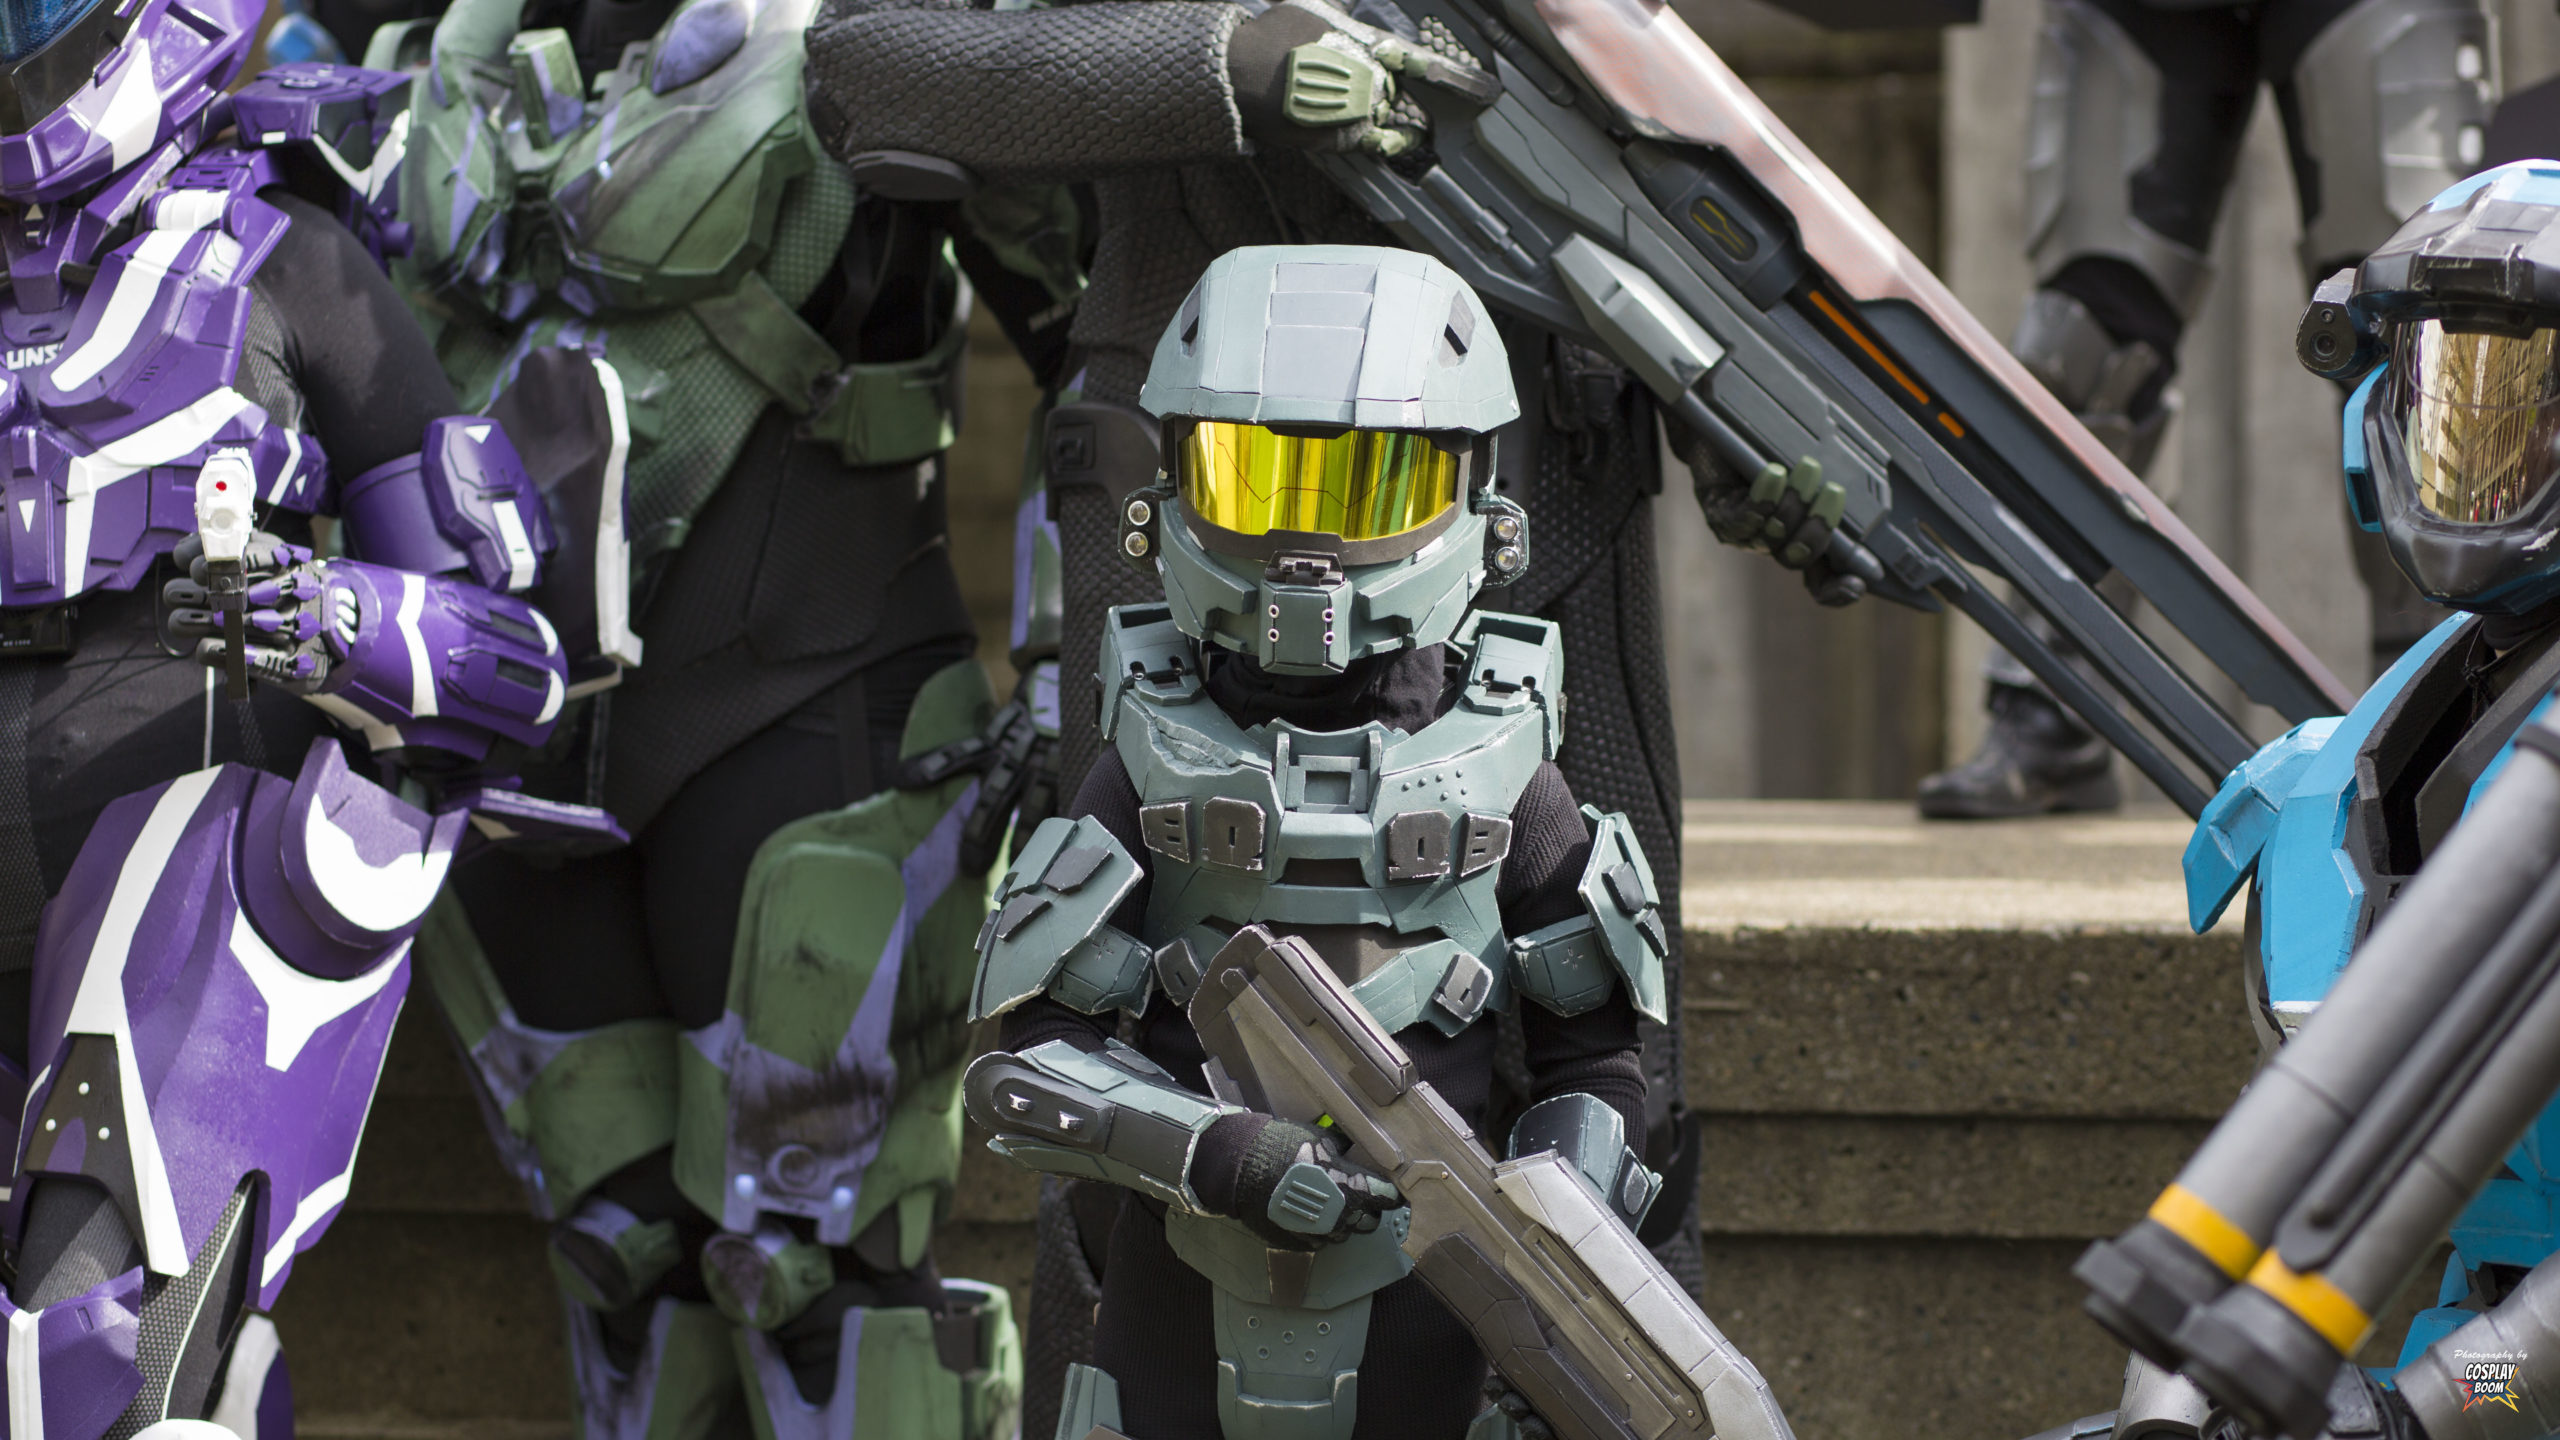 Iron Man’s Best Friend Ultron, Chappie Cosplay and A Whole Lot of Halo